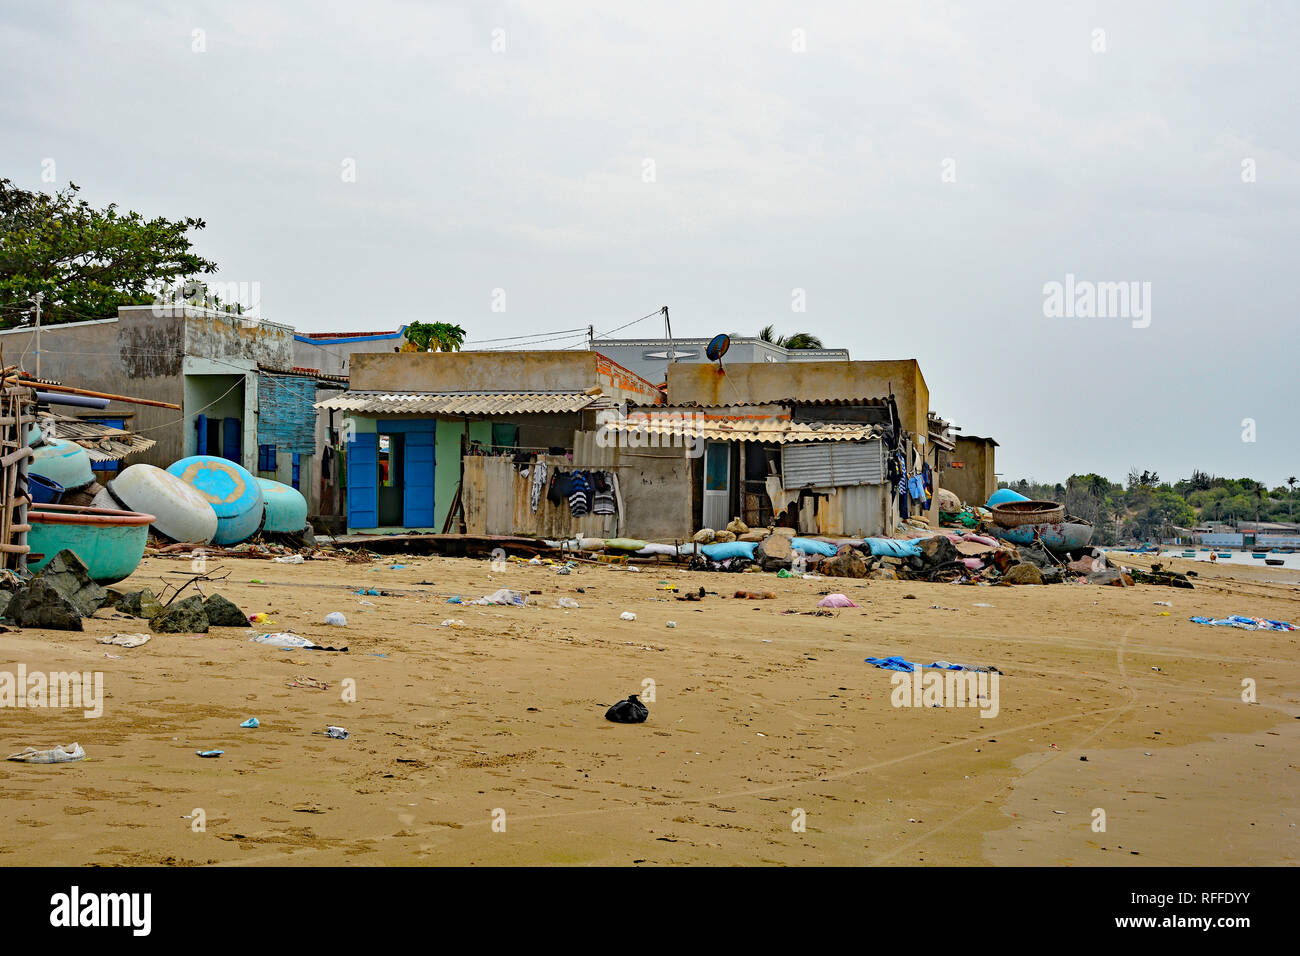 Mui Ne, Vietnam - December 27 2017. Houses at Mui Ne Fishing Village. Despite being a major tourist attraction in the area, it is littered with rubbis Stock Photo